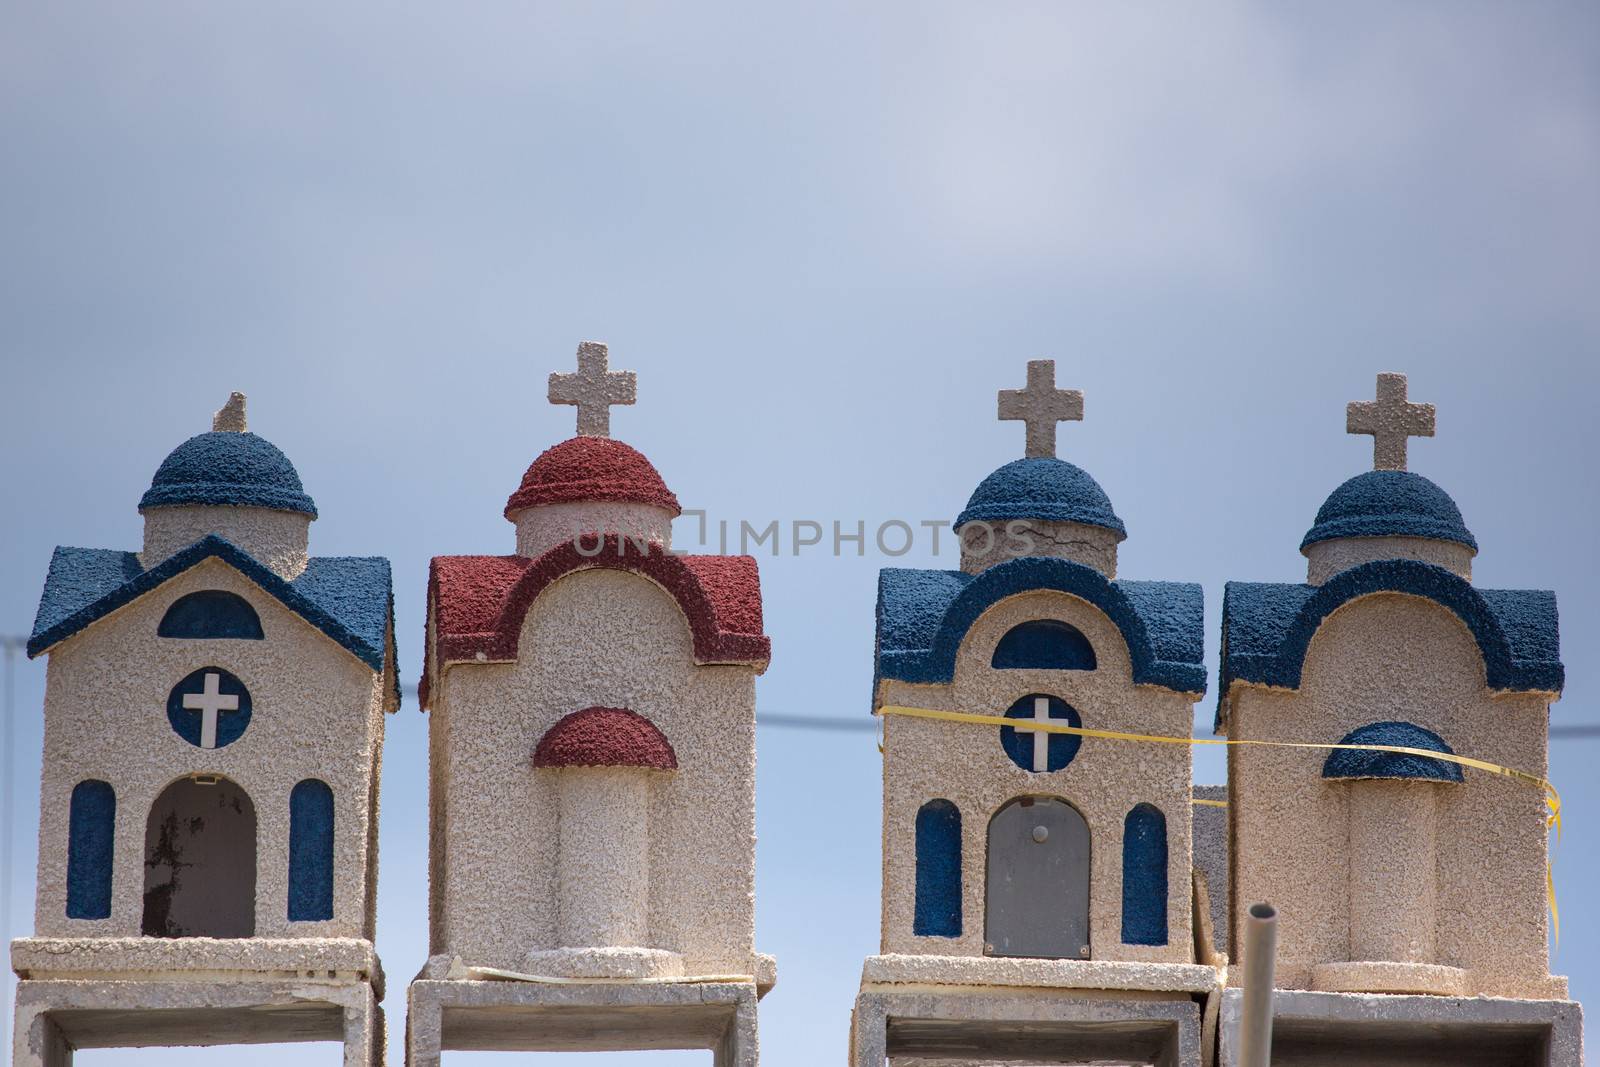 Little colorful orthodox temples in Crete, Greece, 2013.